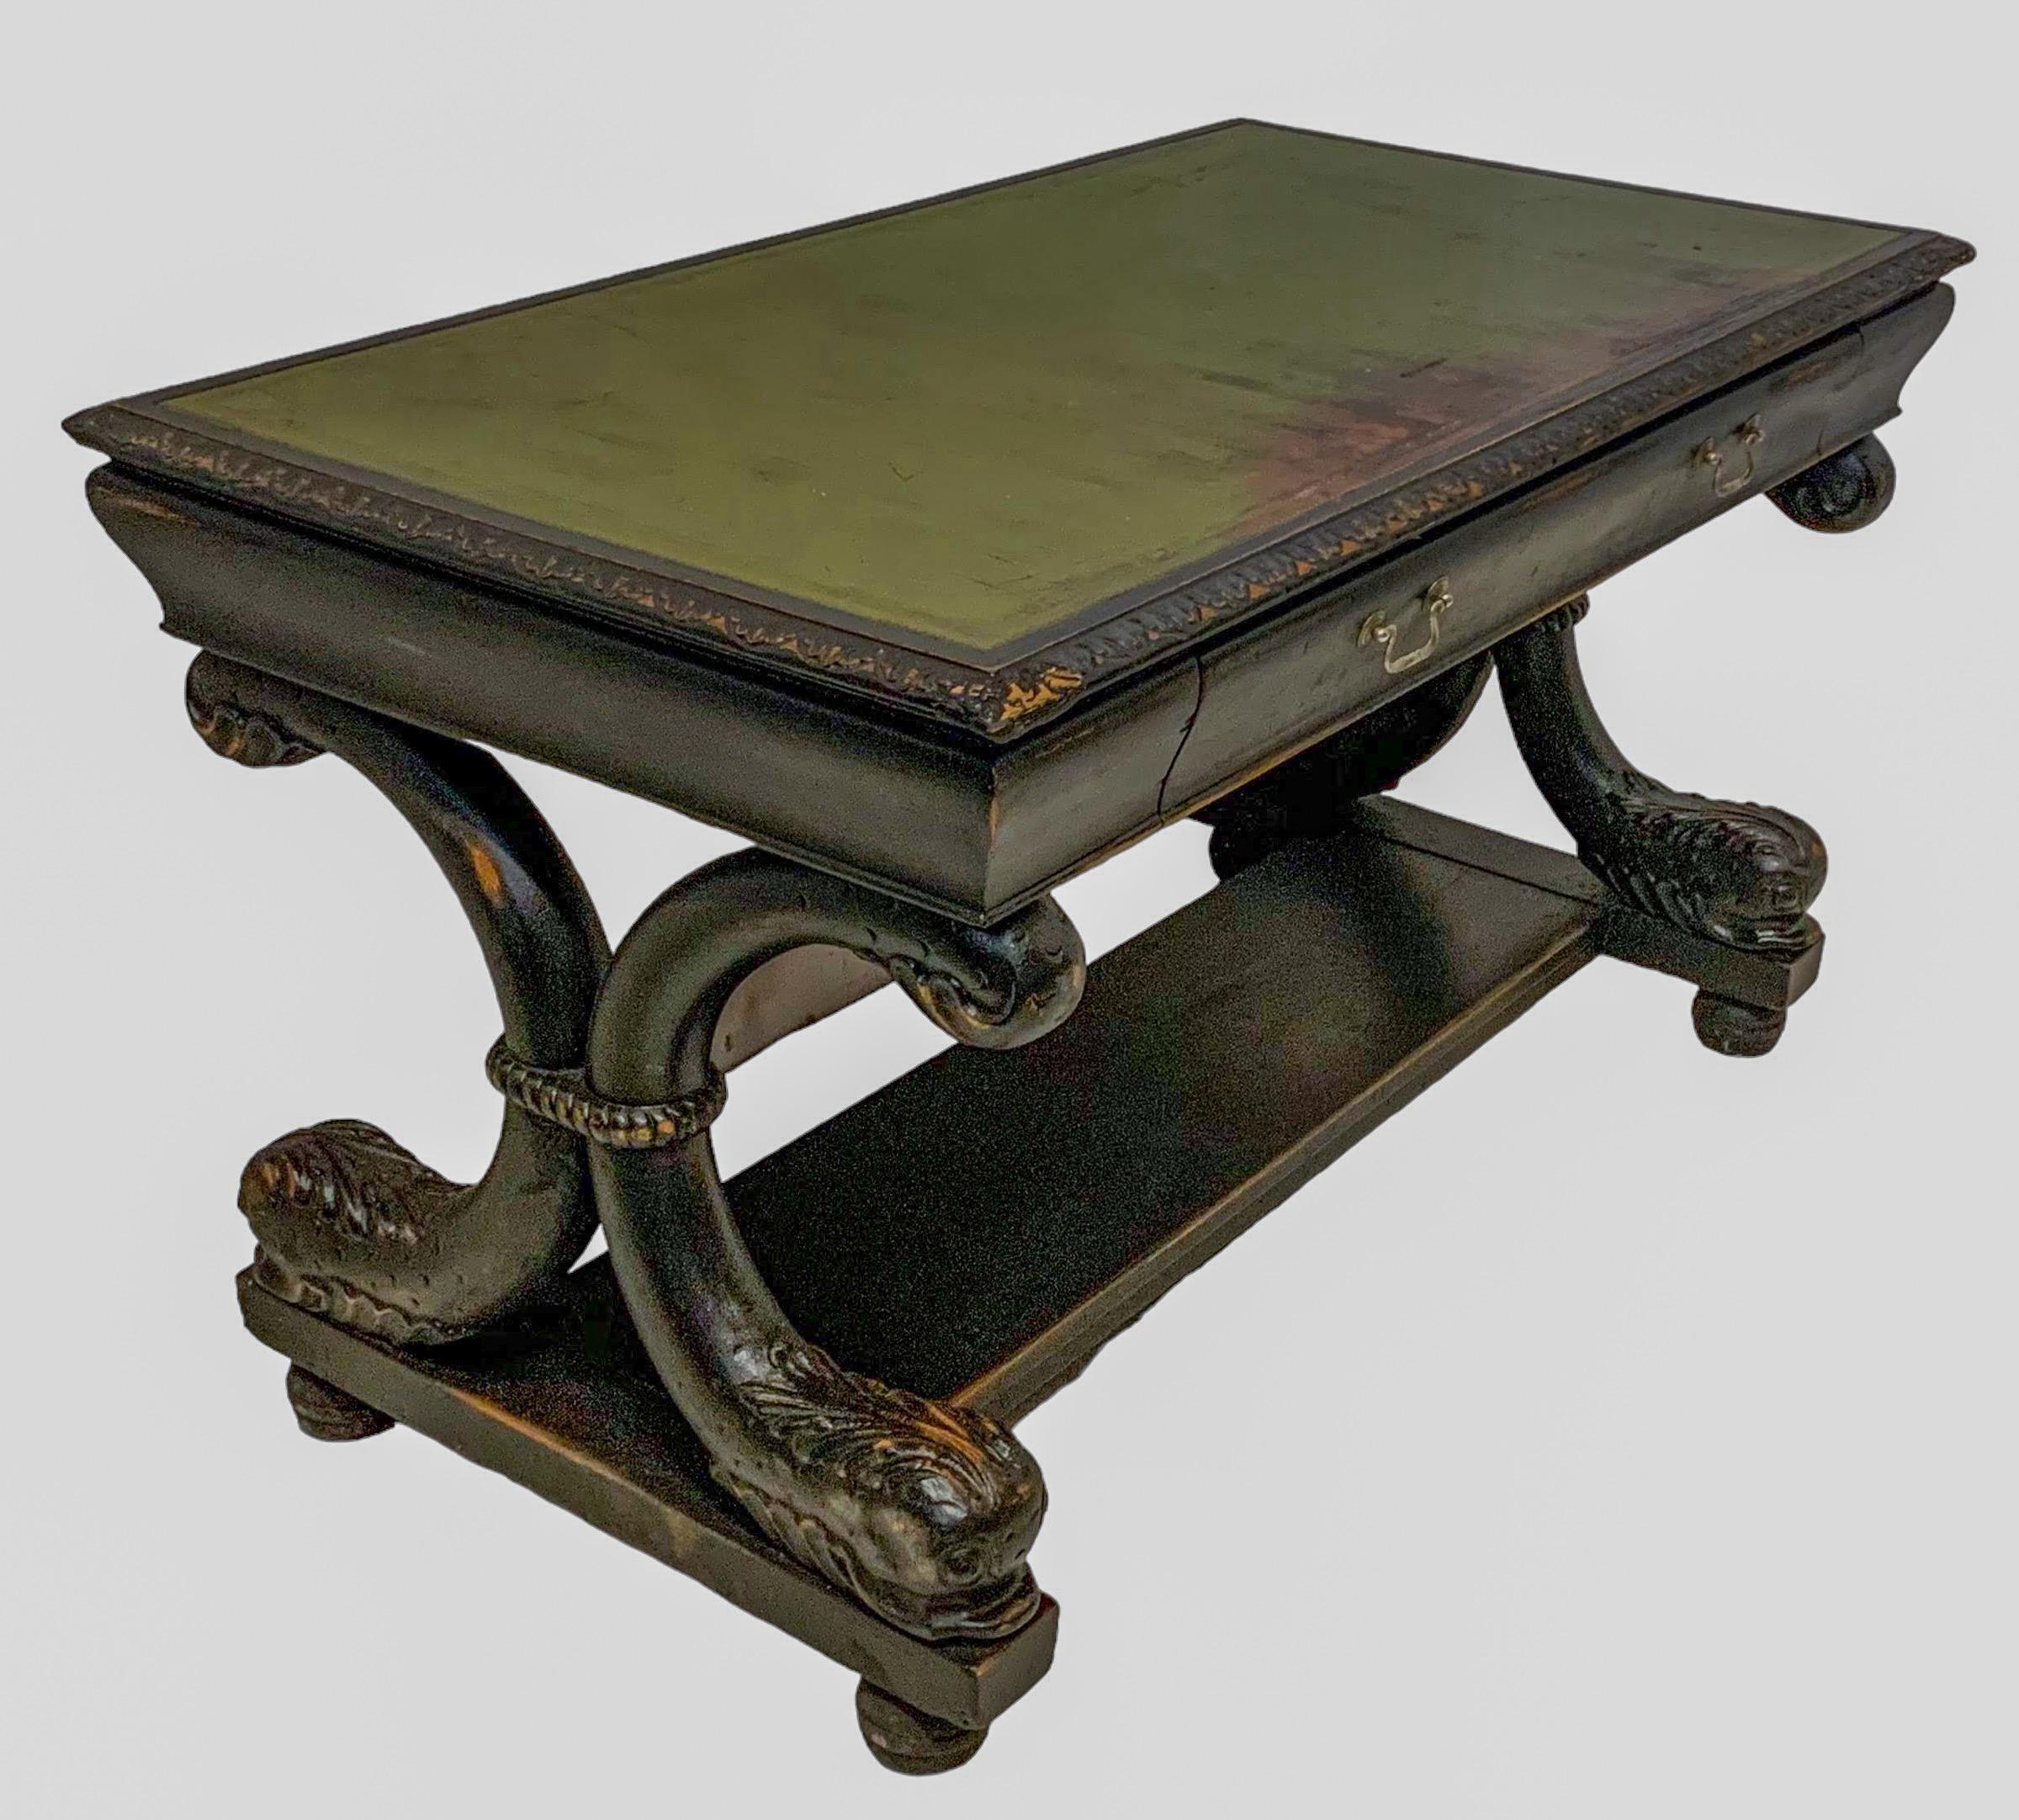 This is a late 19th century Neo-classical R.J. Horner style ebonized desk with carved dolphin base and tooled green leather top. It has wonderful patina! The desk is very heavy and most likely to be oak. It is unmarked. 